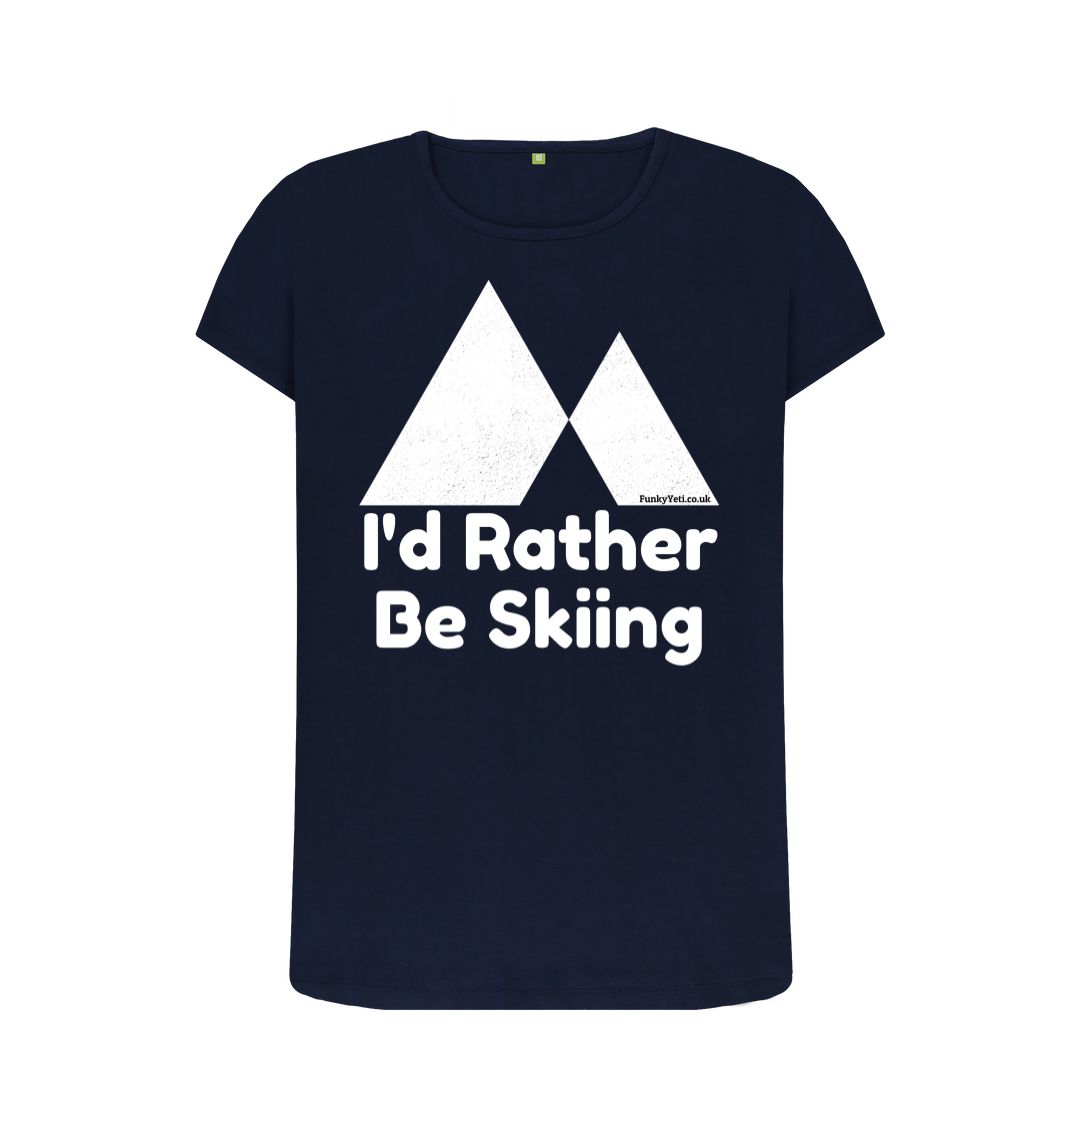 Navy Blue Funky Yeti Women's Tee - I'd Rather Be Skiing